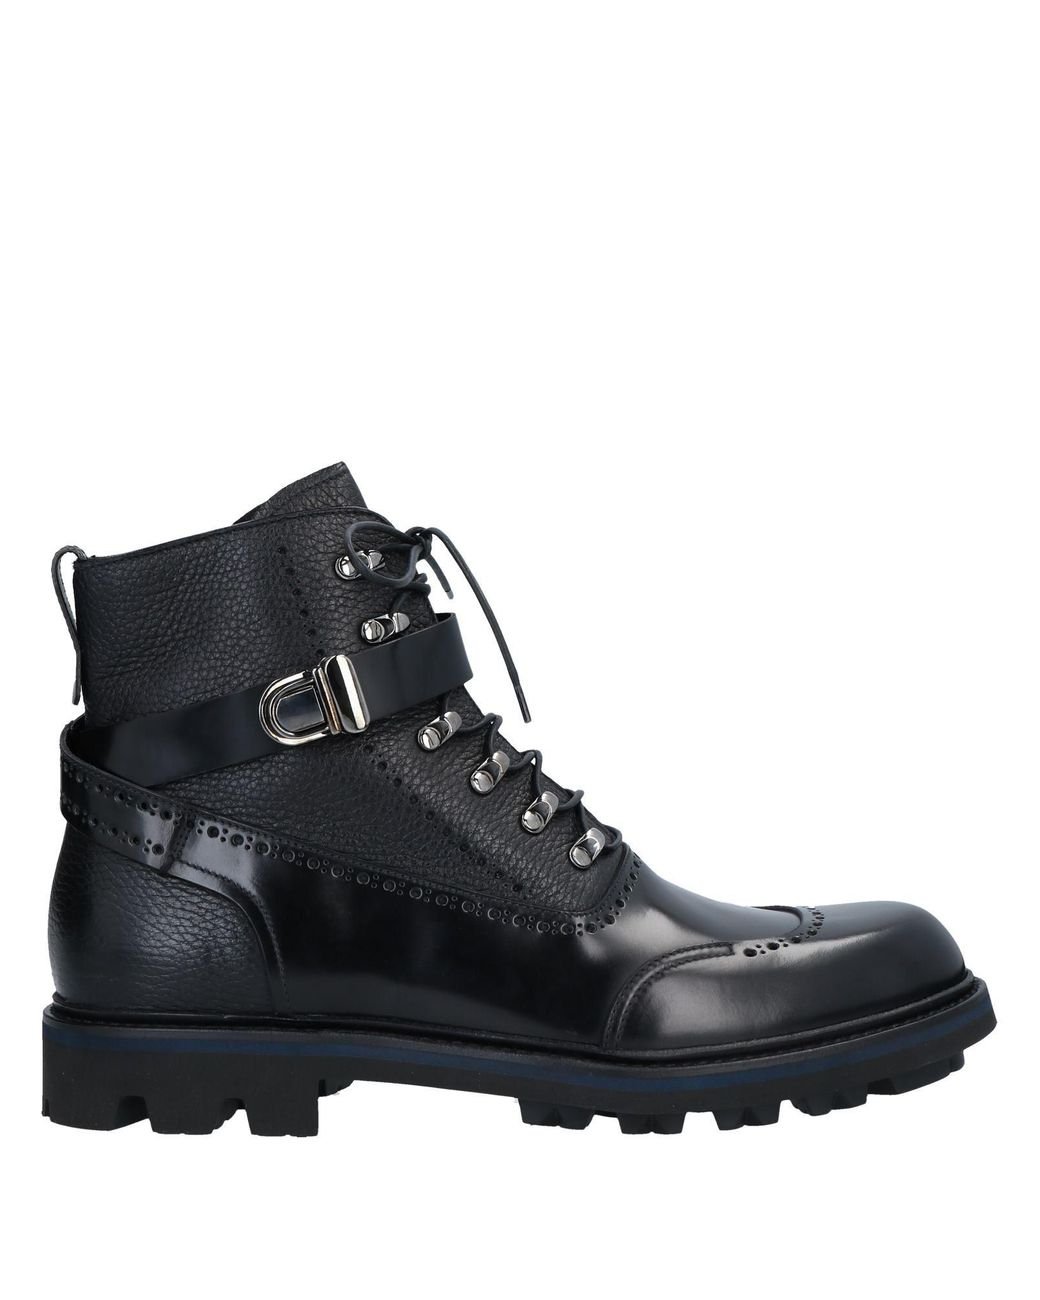 Giorgio Armani Leather Ankle Boots in Black for Men - Lyst